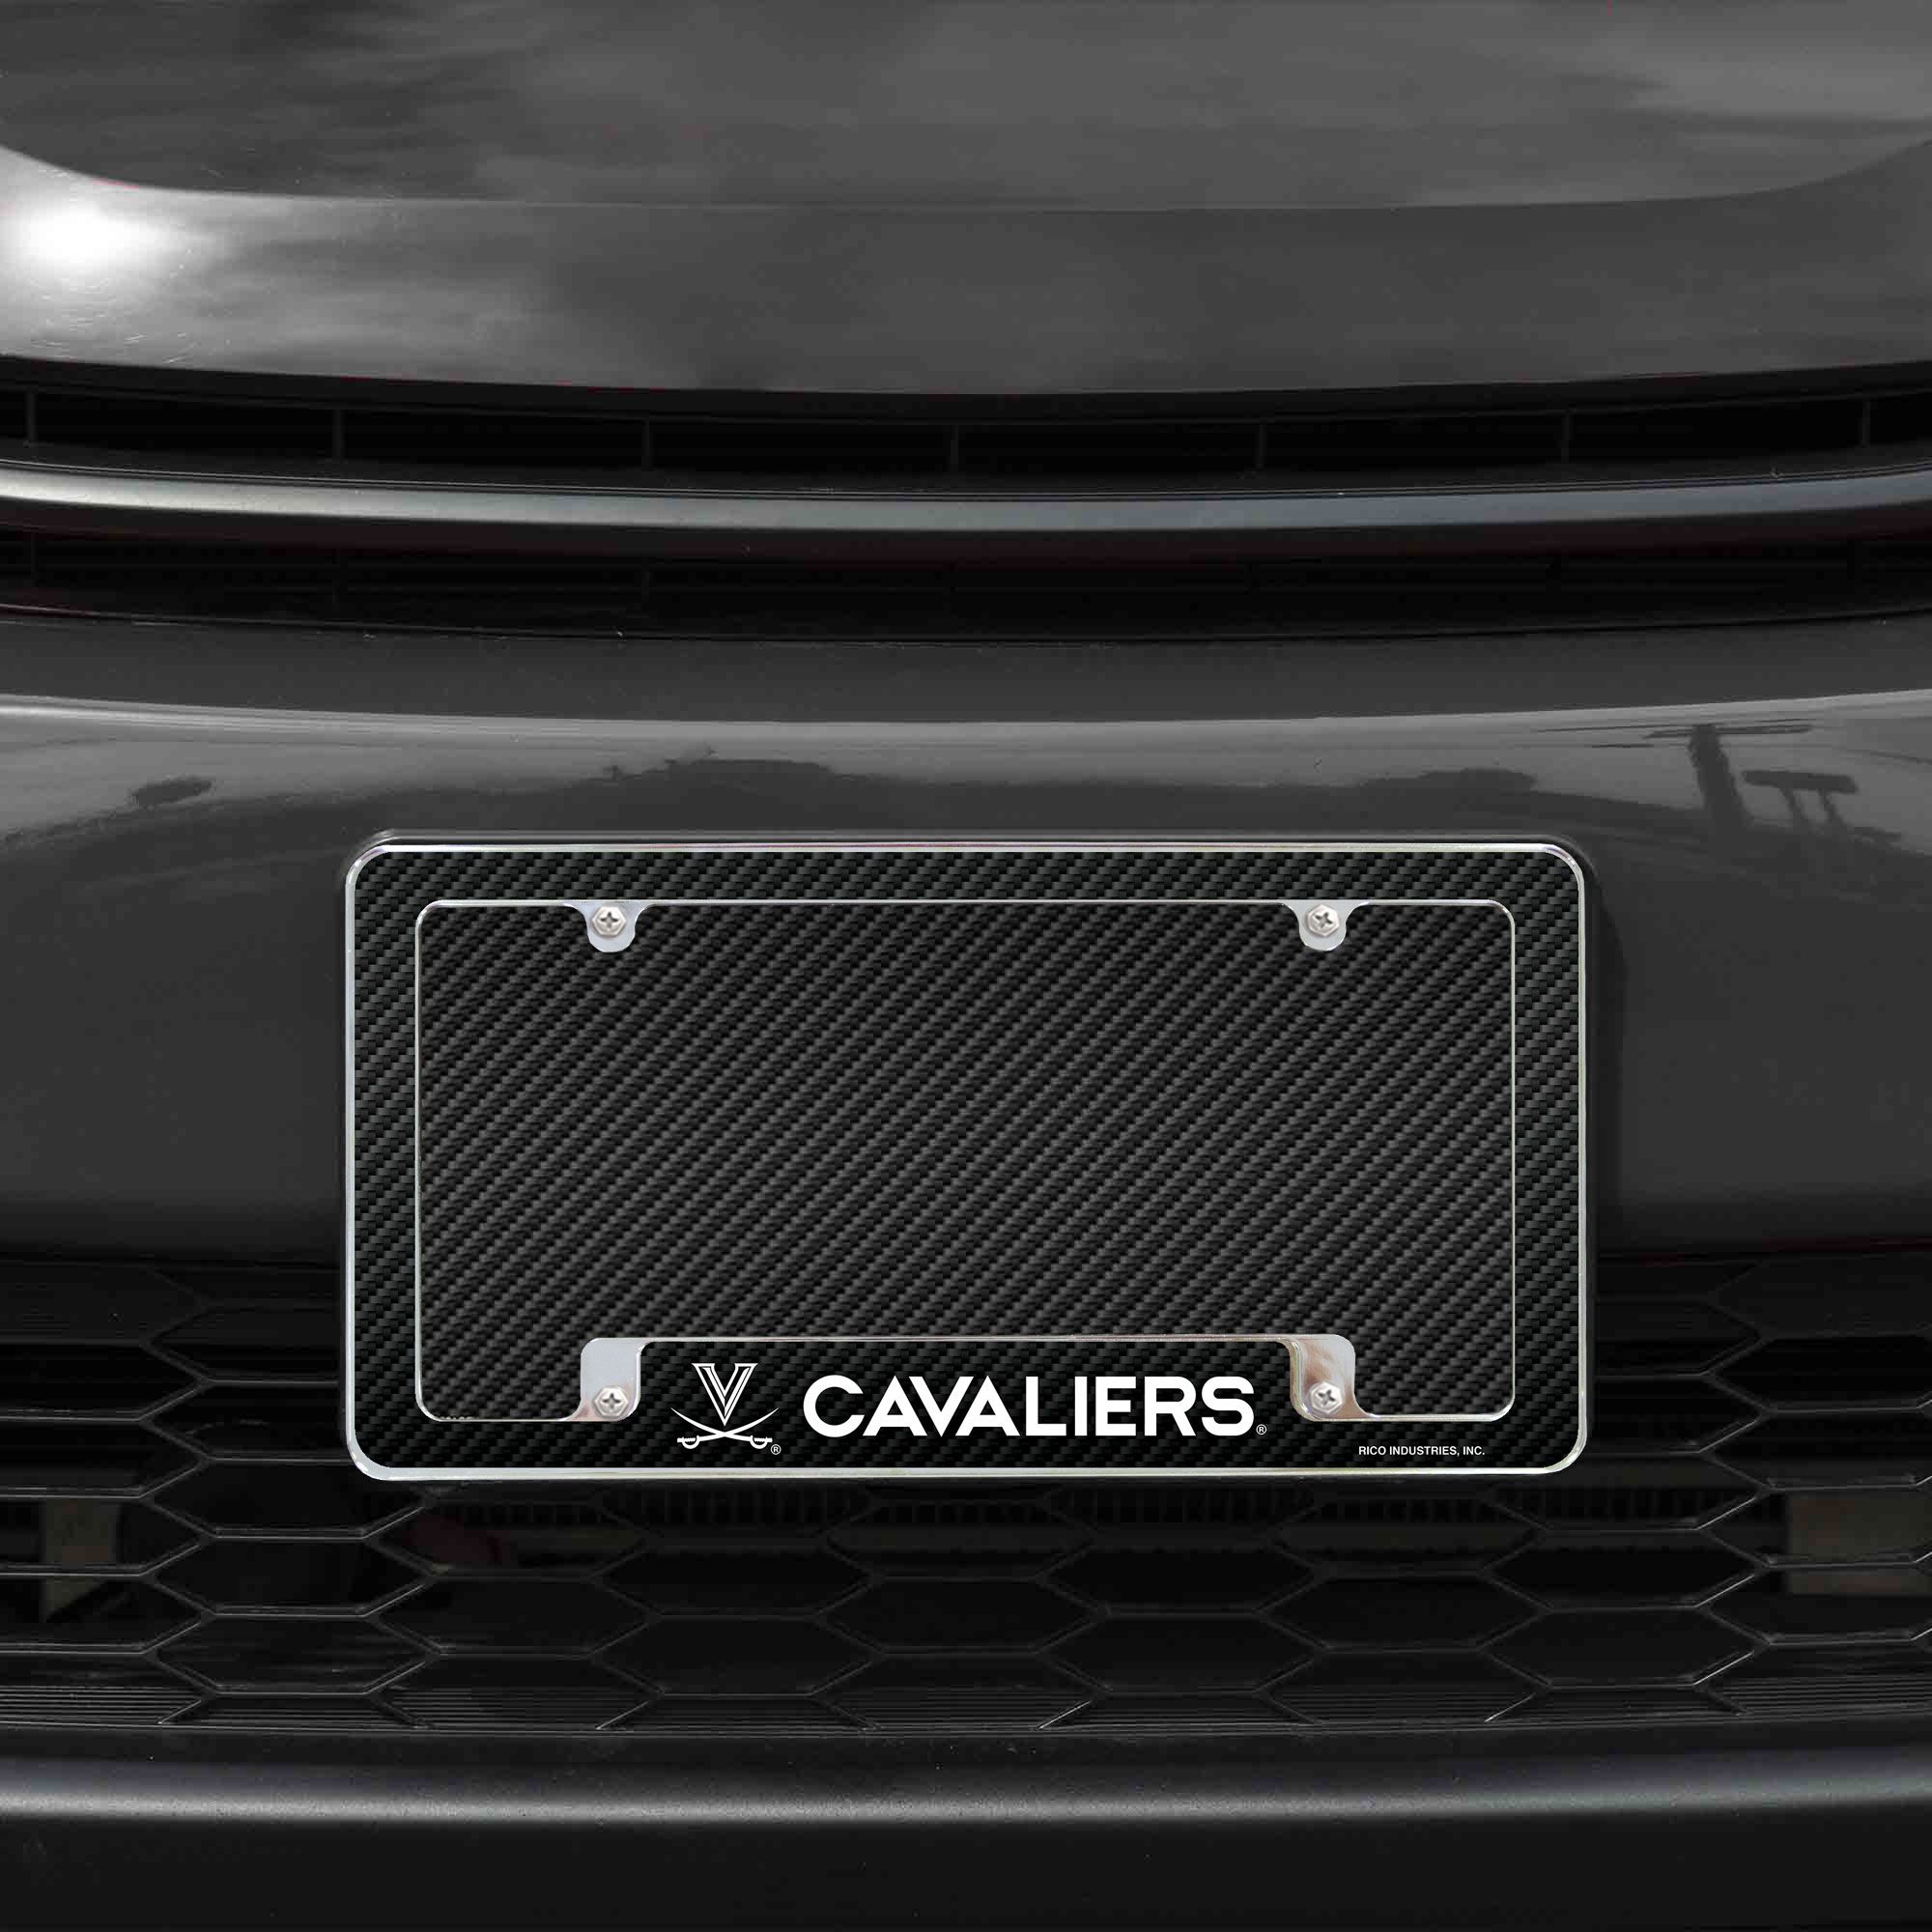 Virginia NCAA Cavaliers Chrome Metal License Plate Frame with Carbon Fiber Design - image 2 of 8